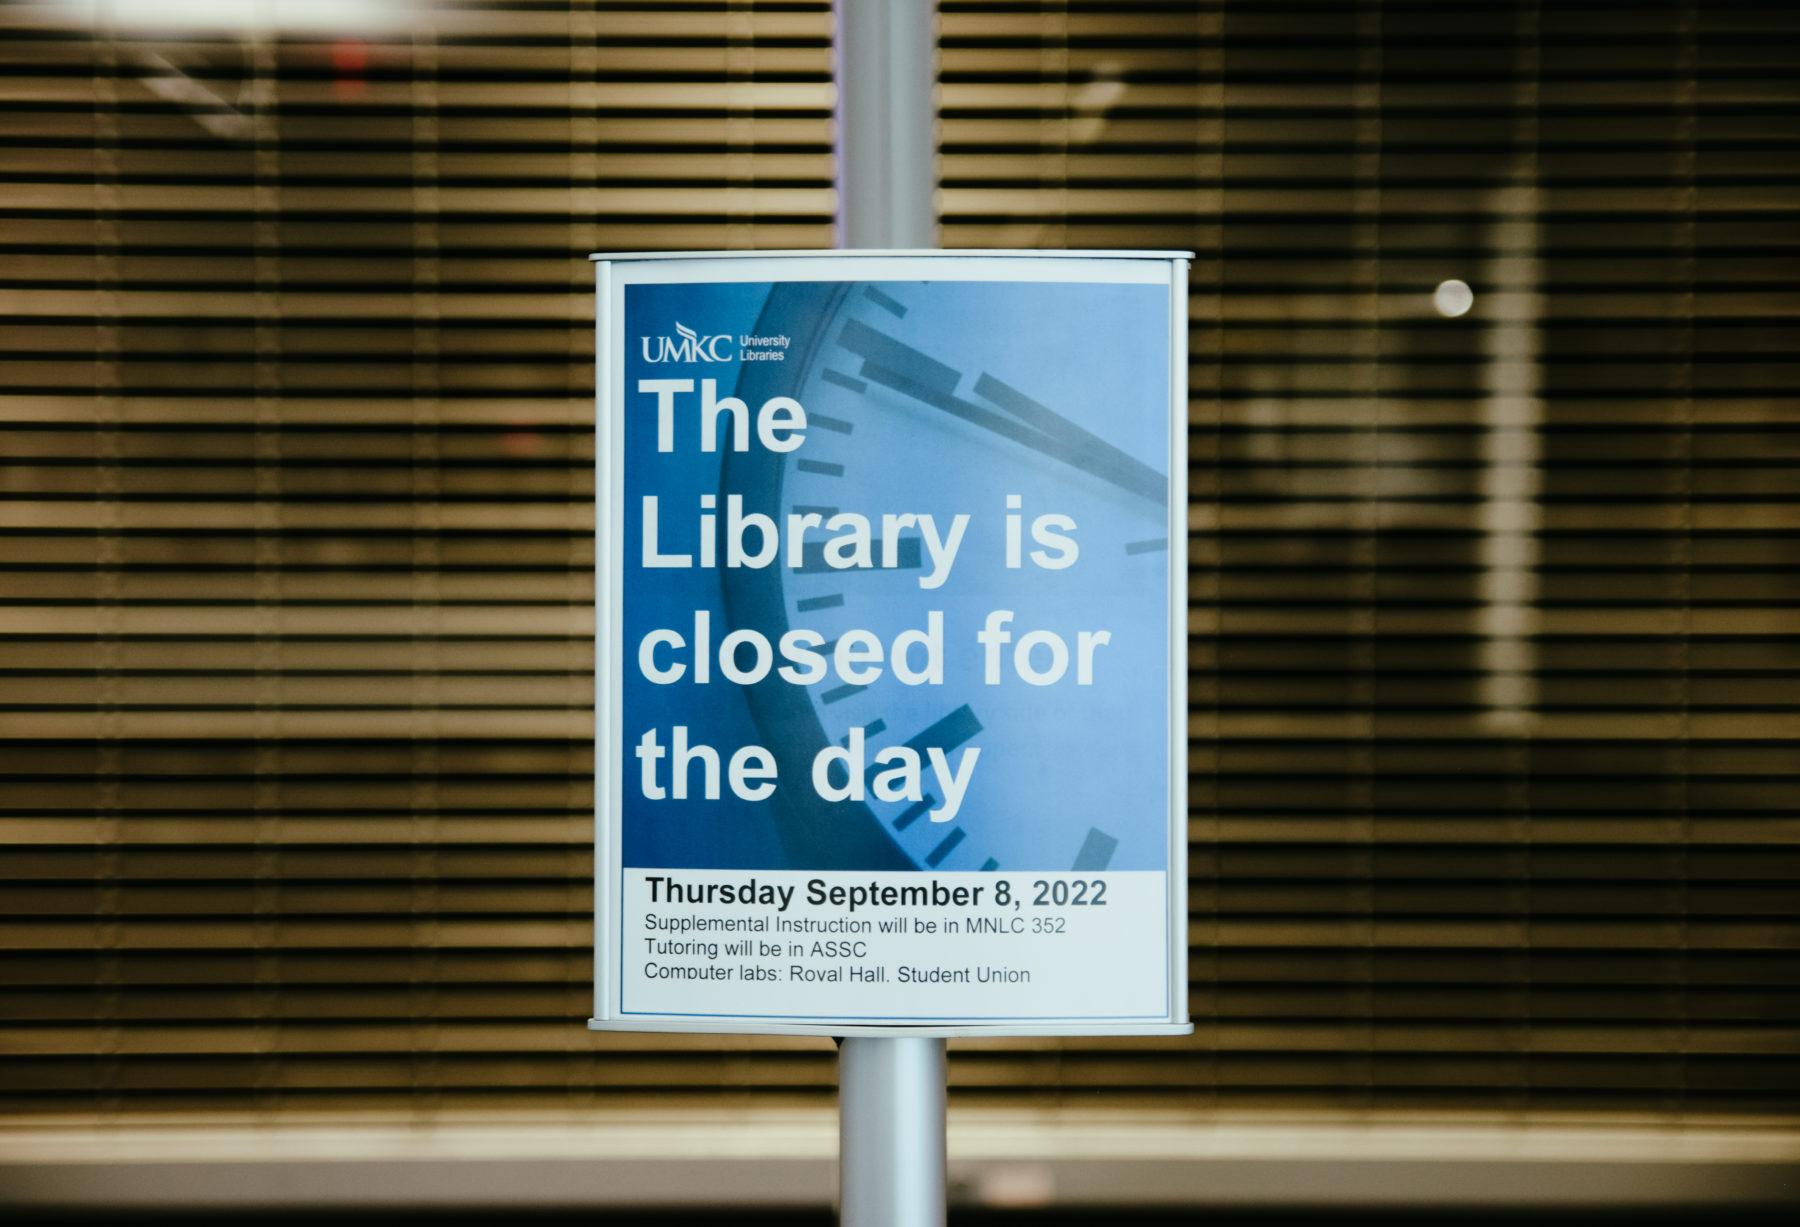 UPDATE: UMKC librarians confirm connection between recent library closure and UM System